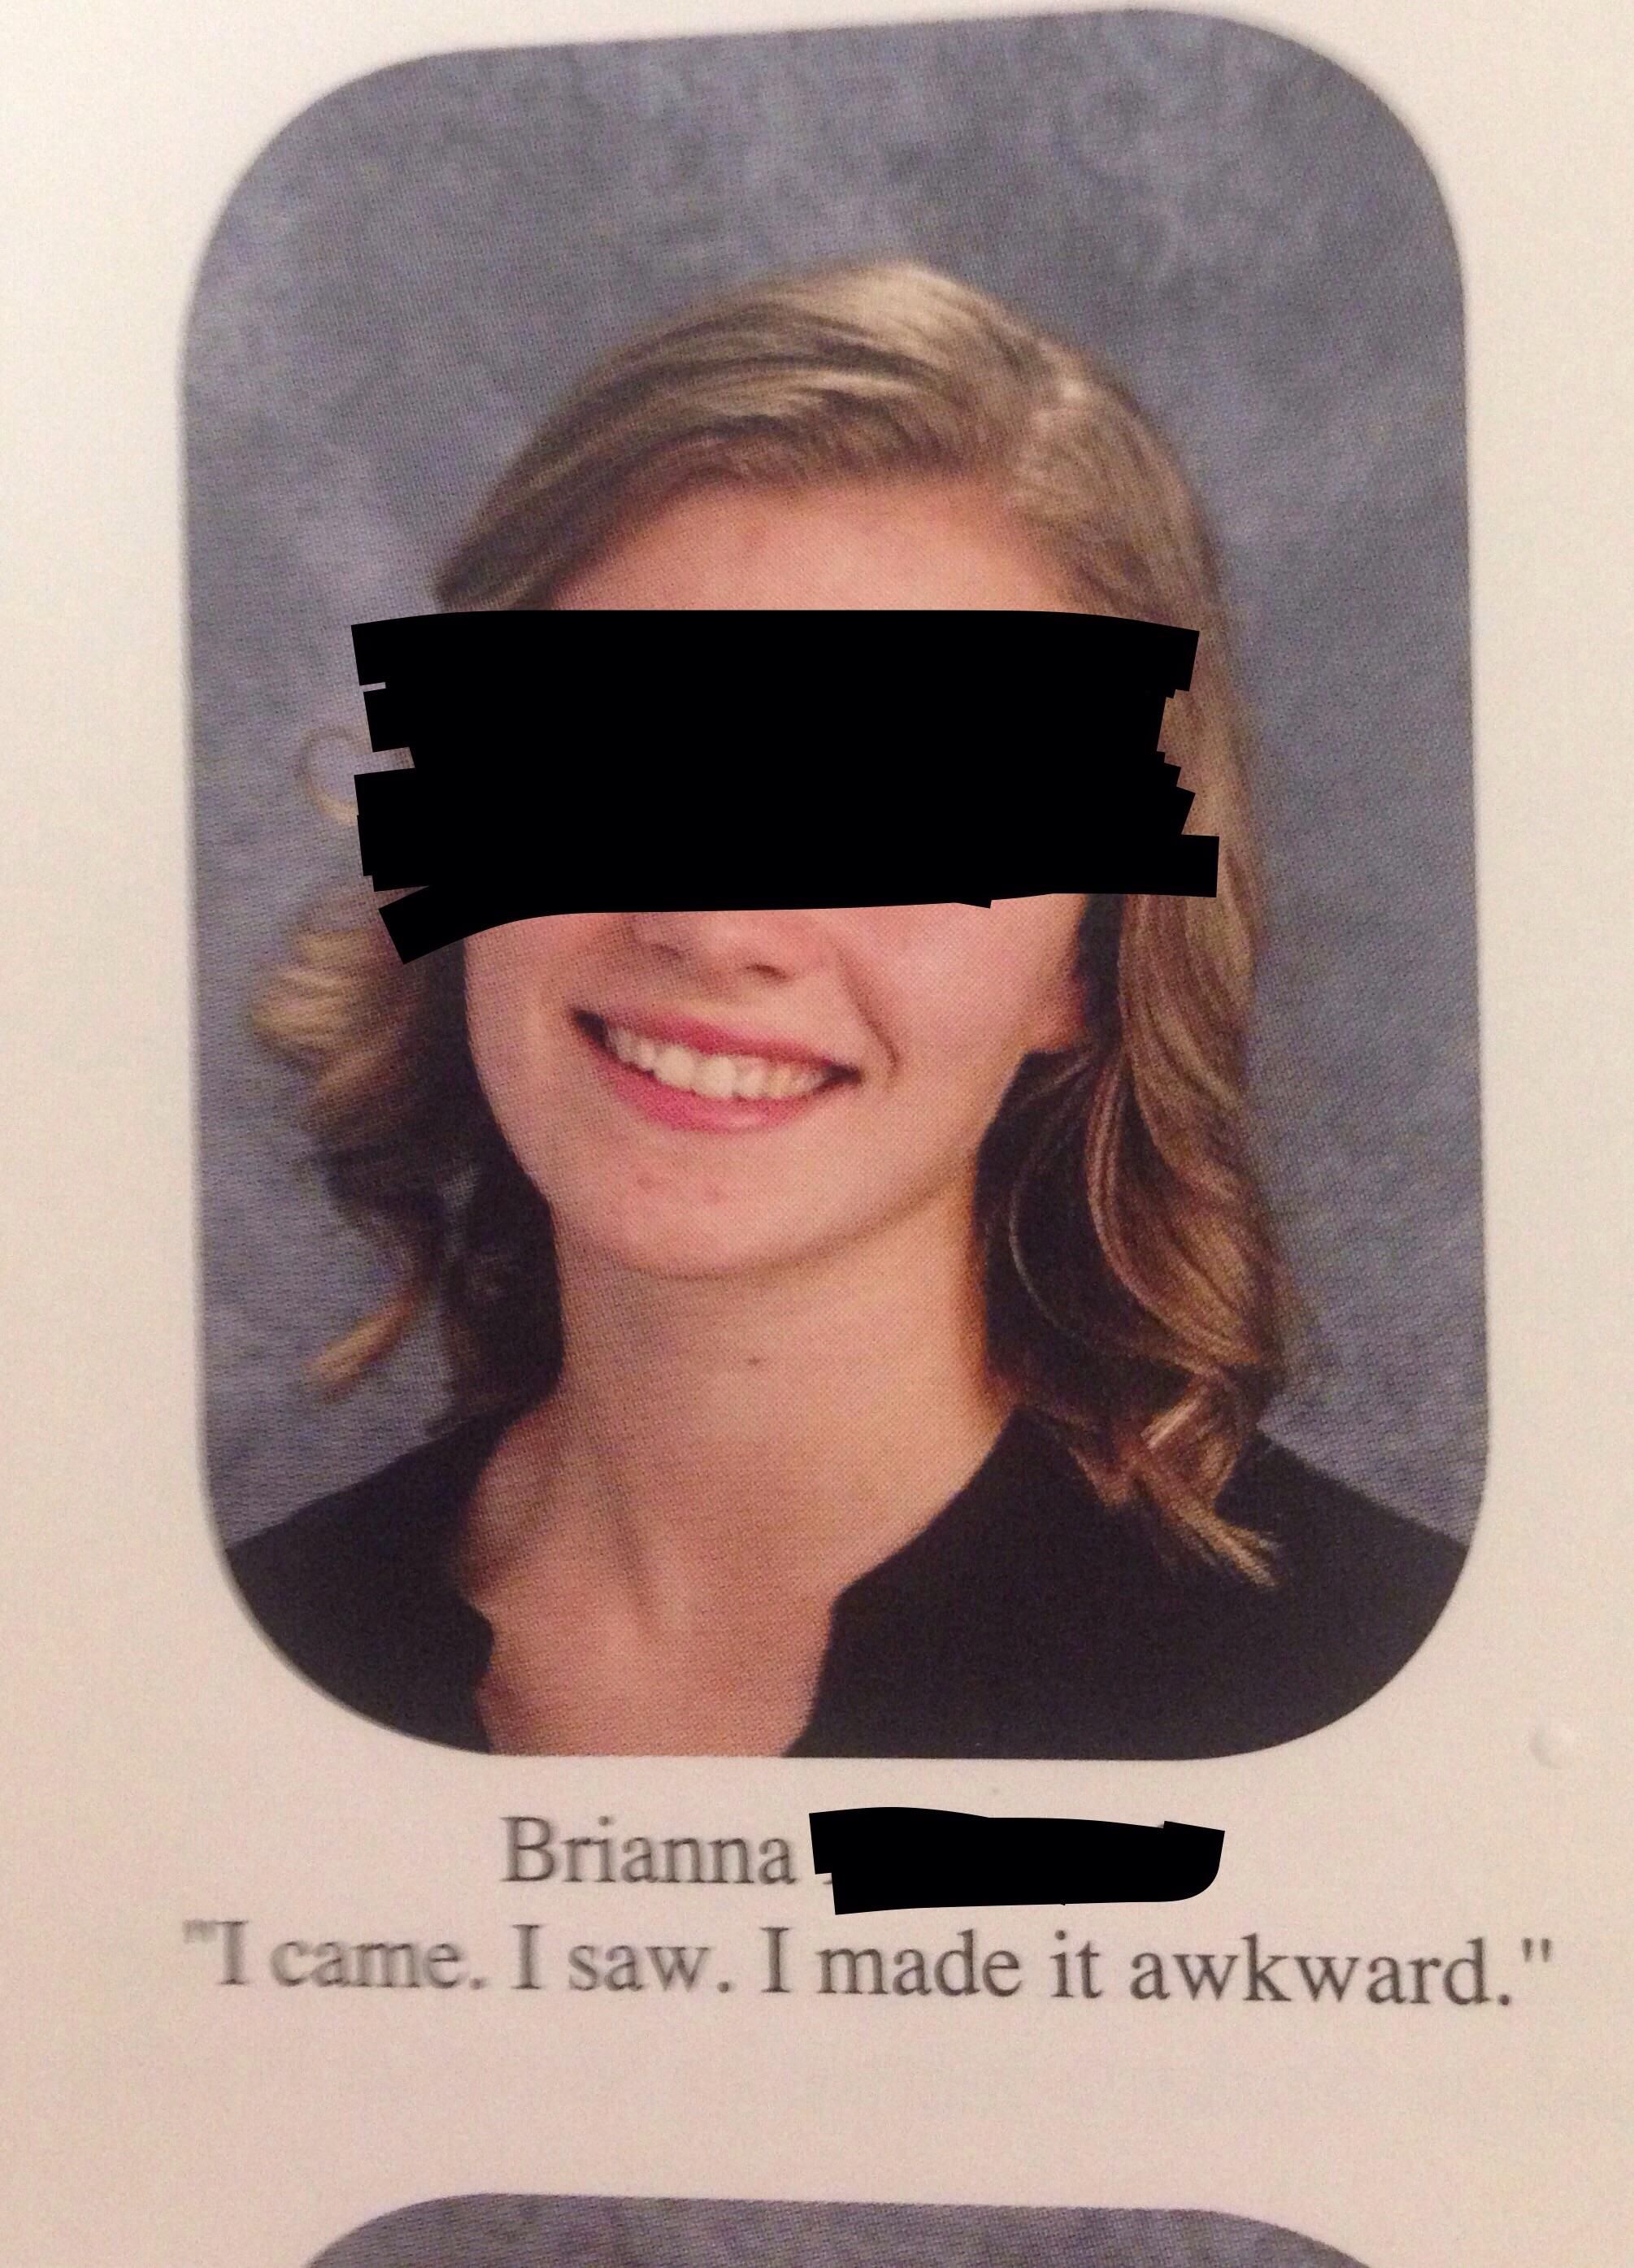 The school's mormon girl has an interesting yearbook quote...